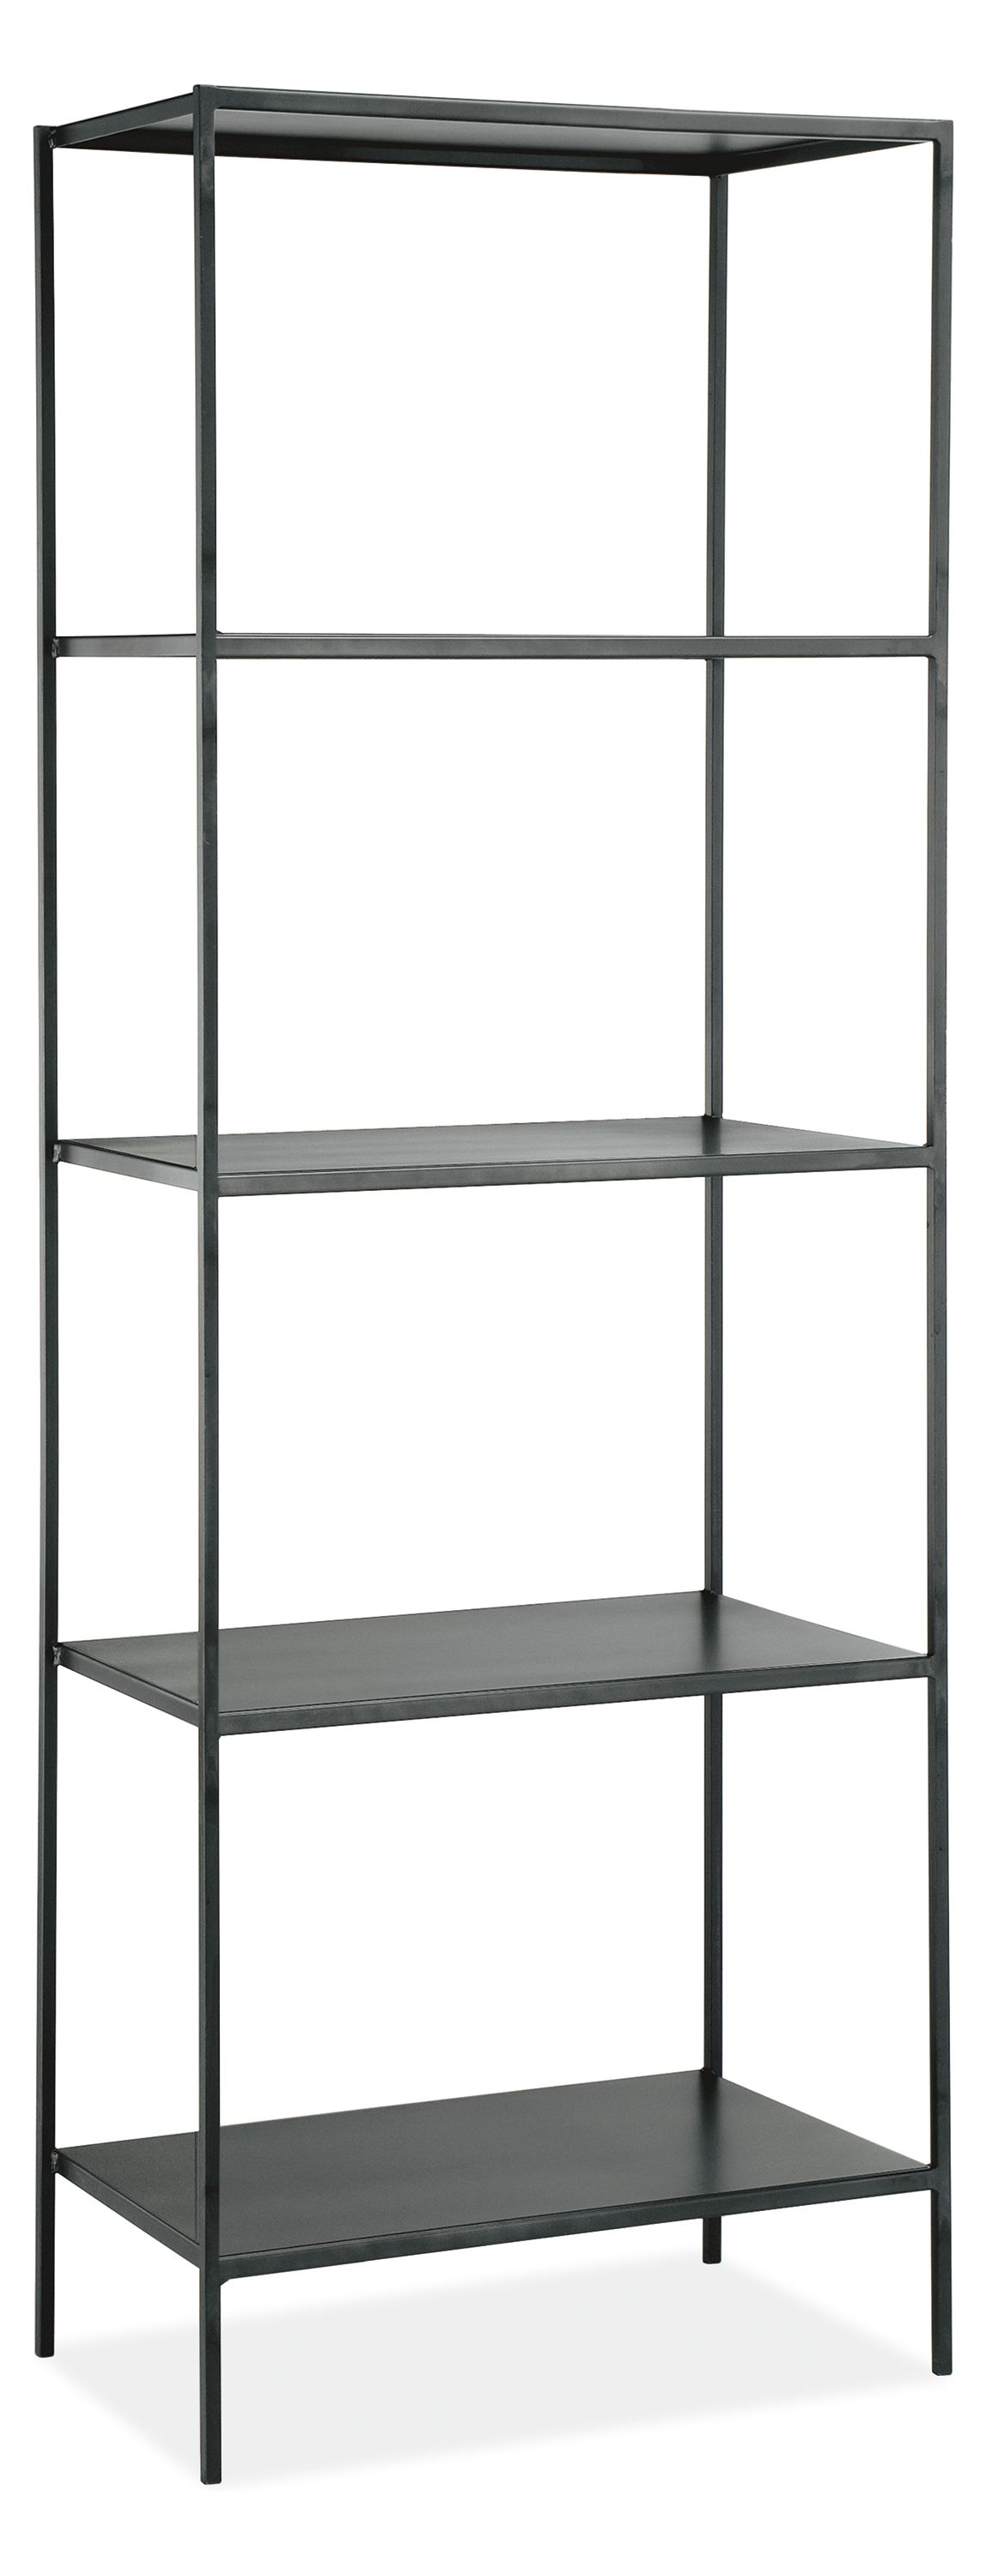 Slim Bookcases In Natural Steel, White Metal Bookcase